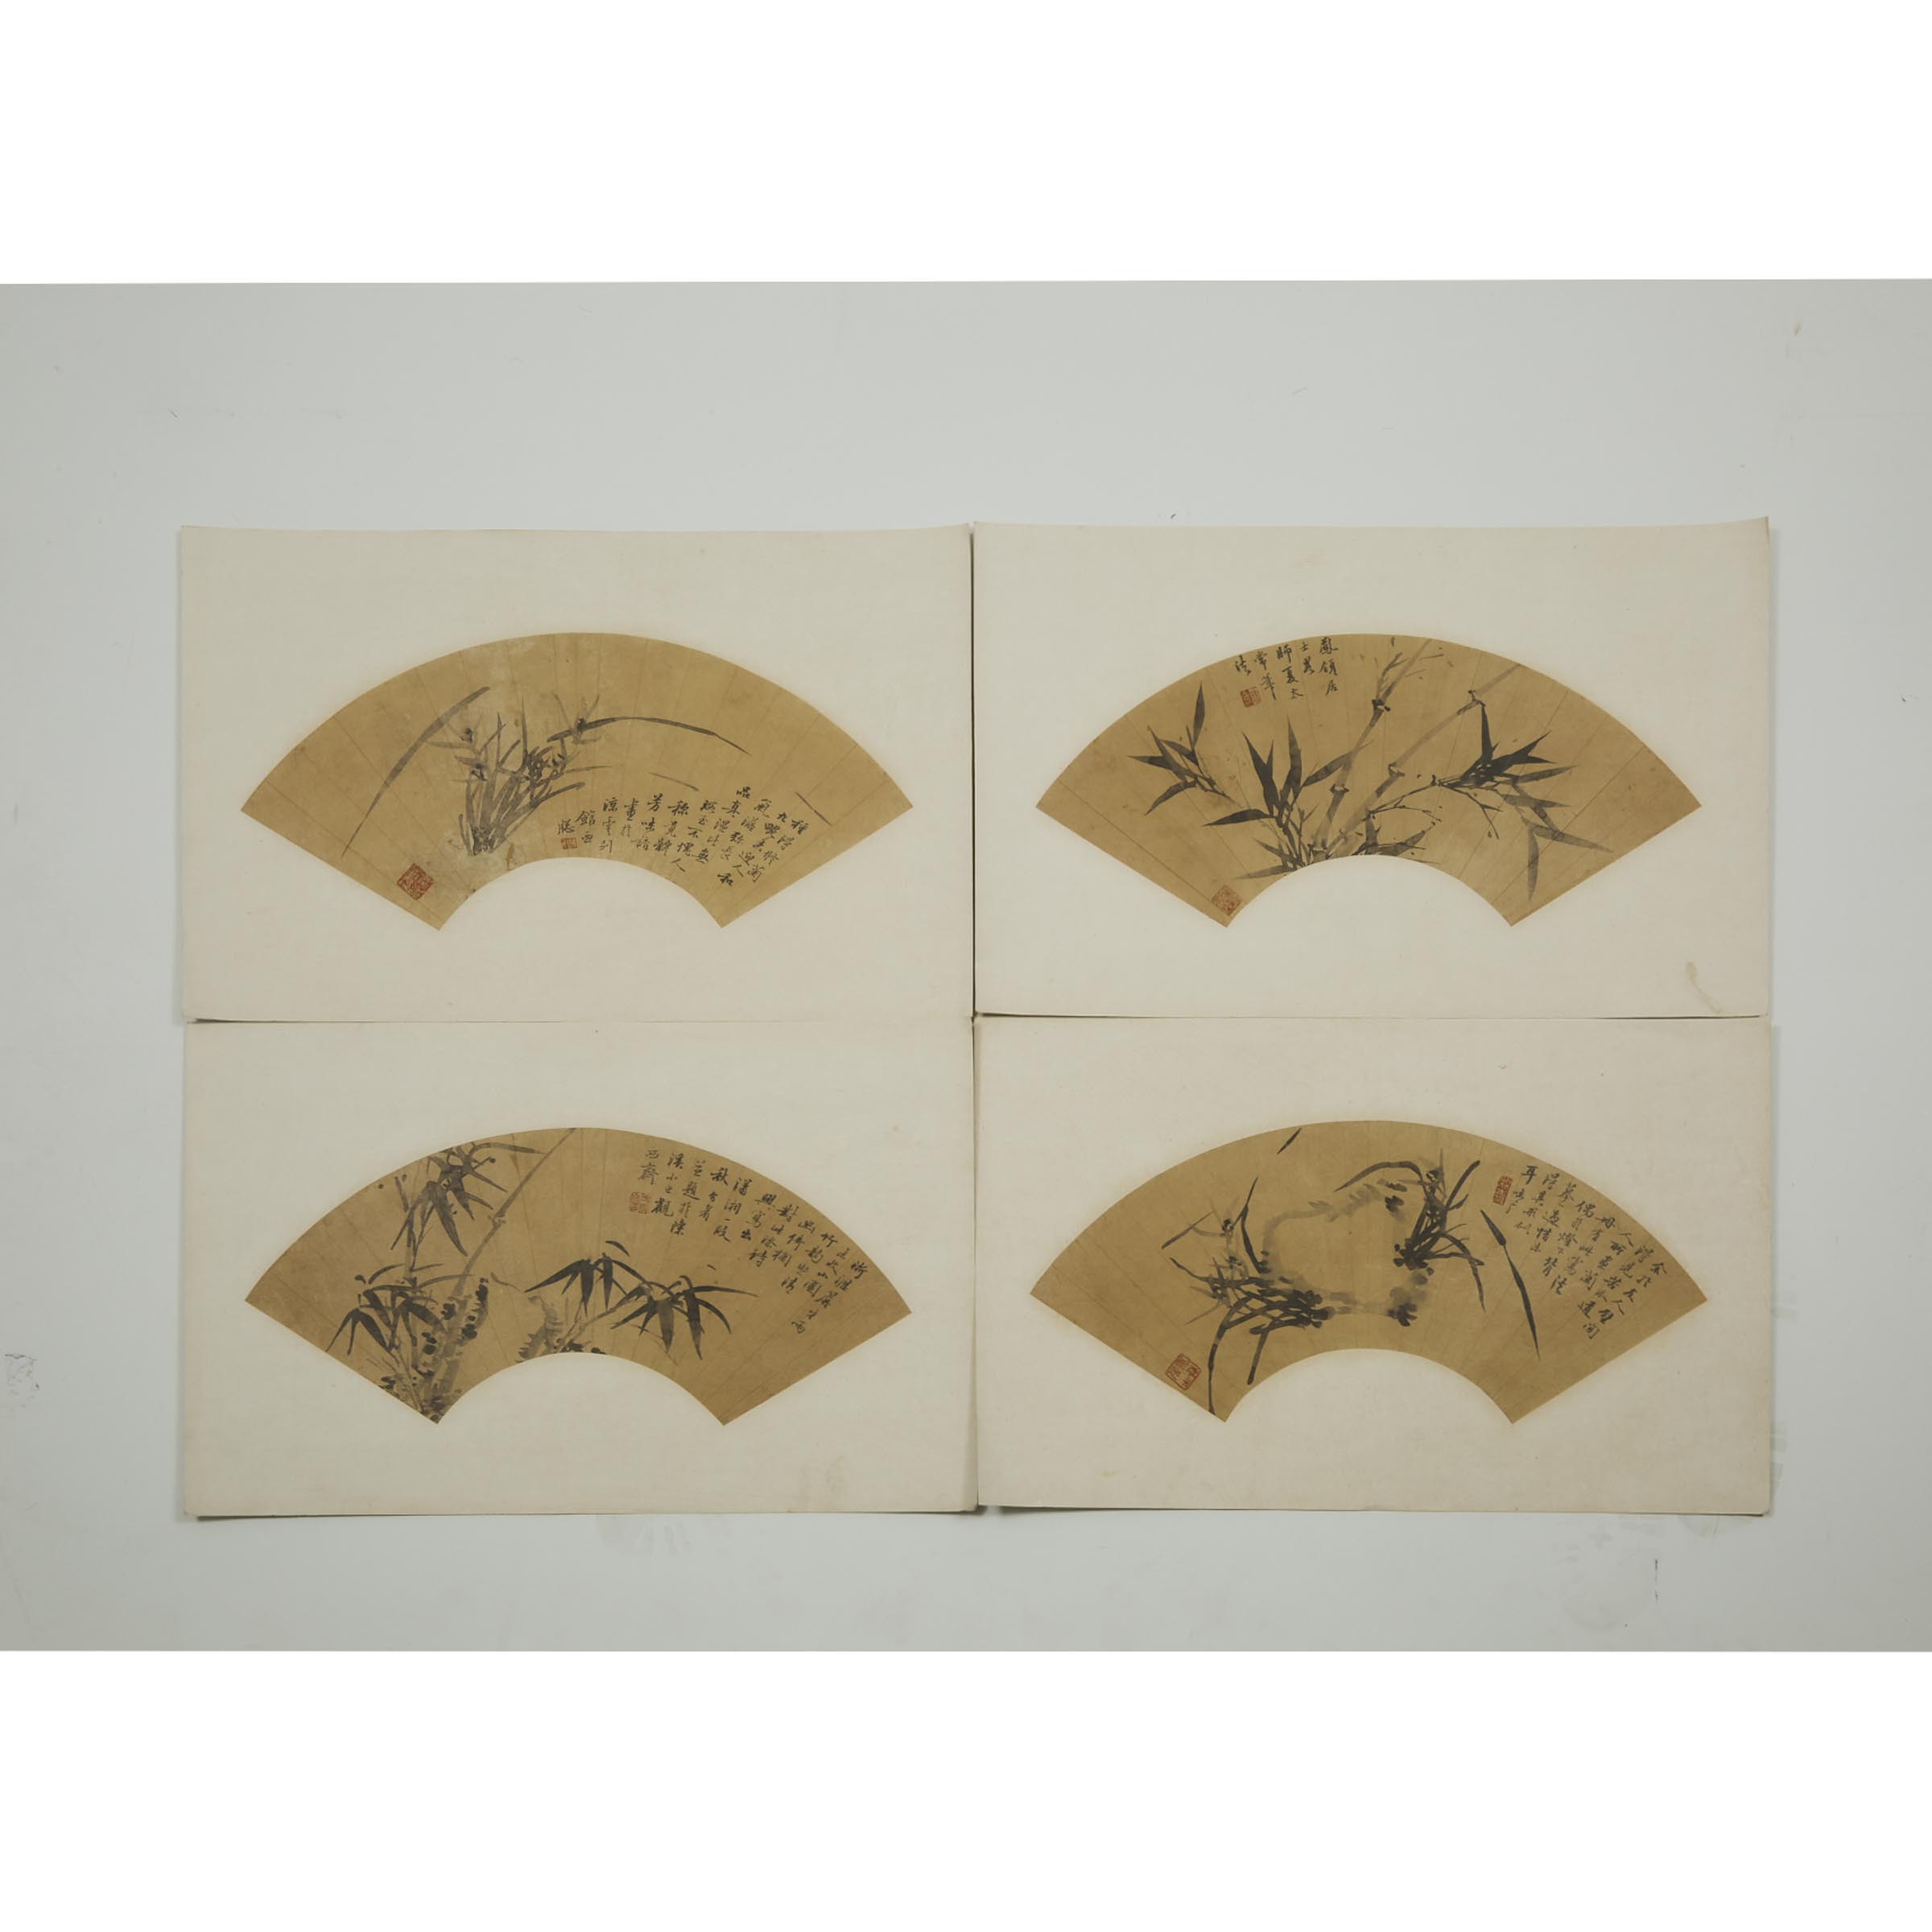 A Group of Four Fan Paintings of Orchids, Bamboo and Calligraphy, Late Qing Dynasty